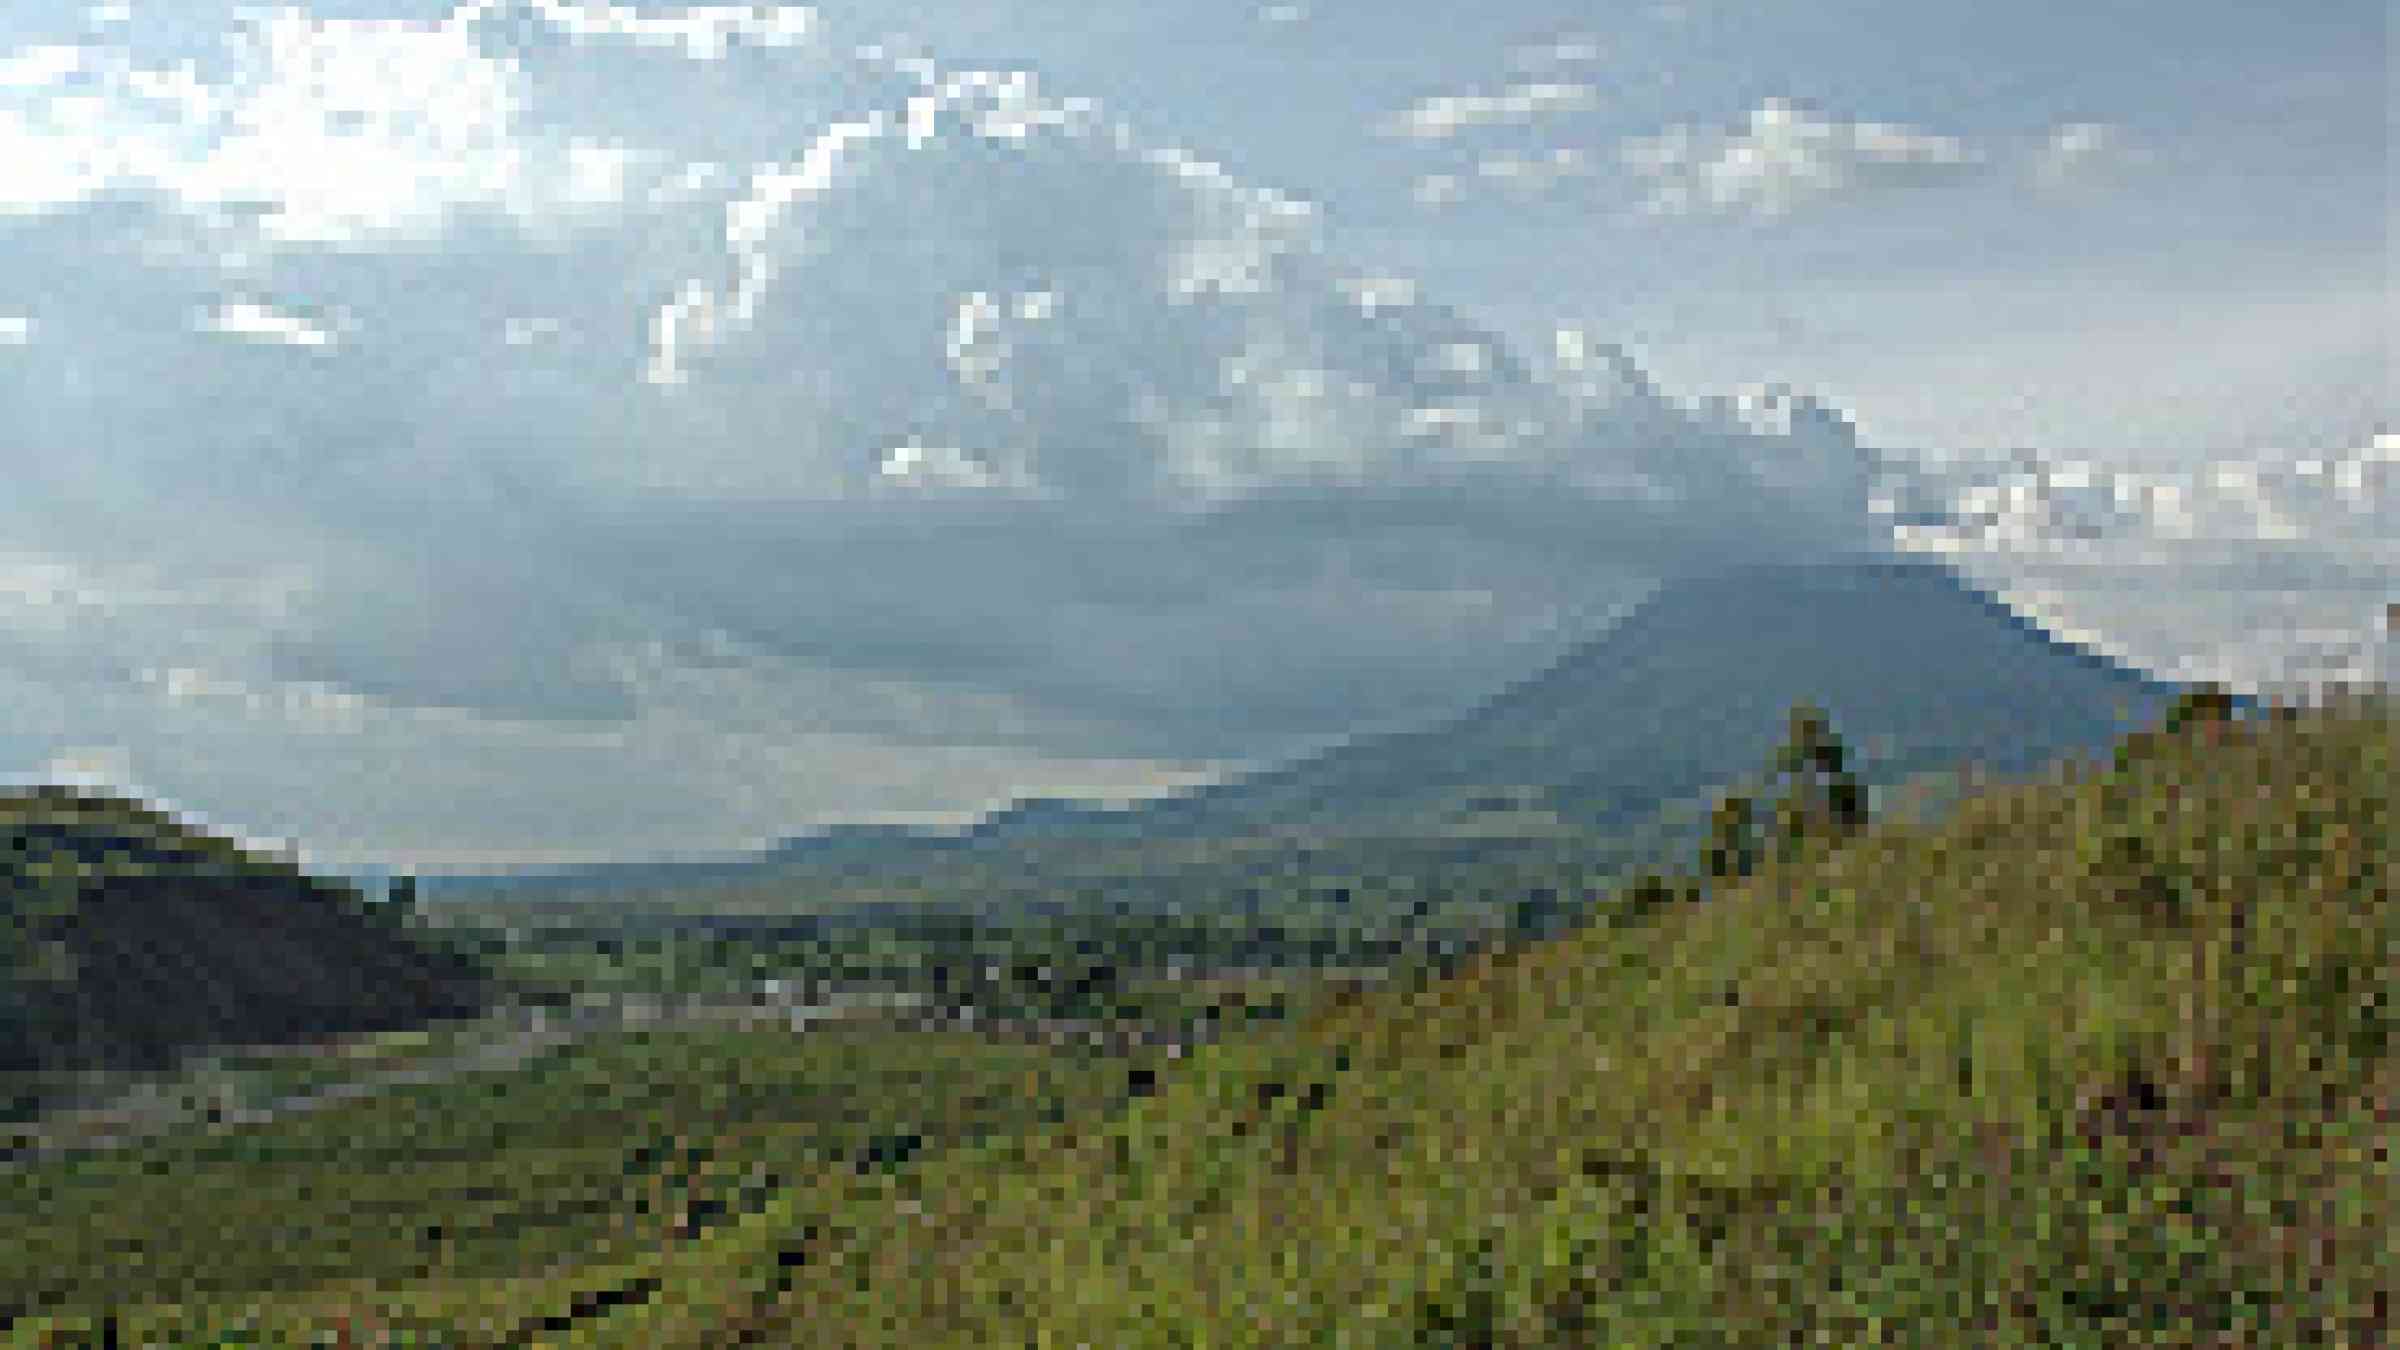 Photo of the hills above Goma, by Flickr user Julien Harneis, Creative Commons Attribution-Share Alike 2.0 Generic, http://www.flickr.com/photos/julien_harneis/436306113/